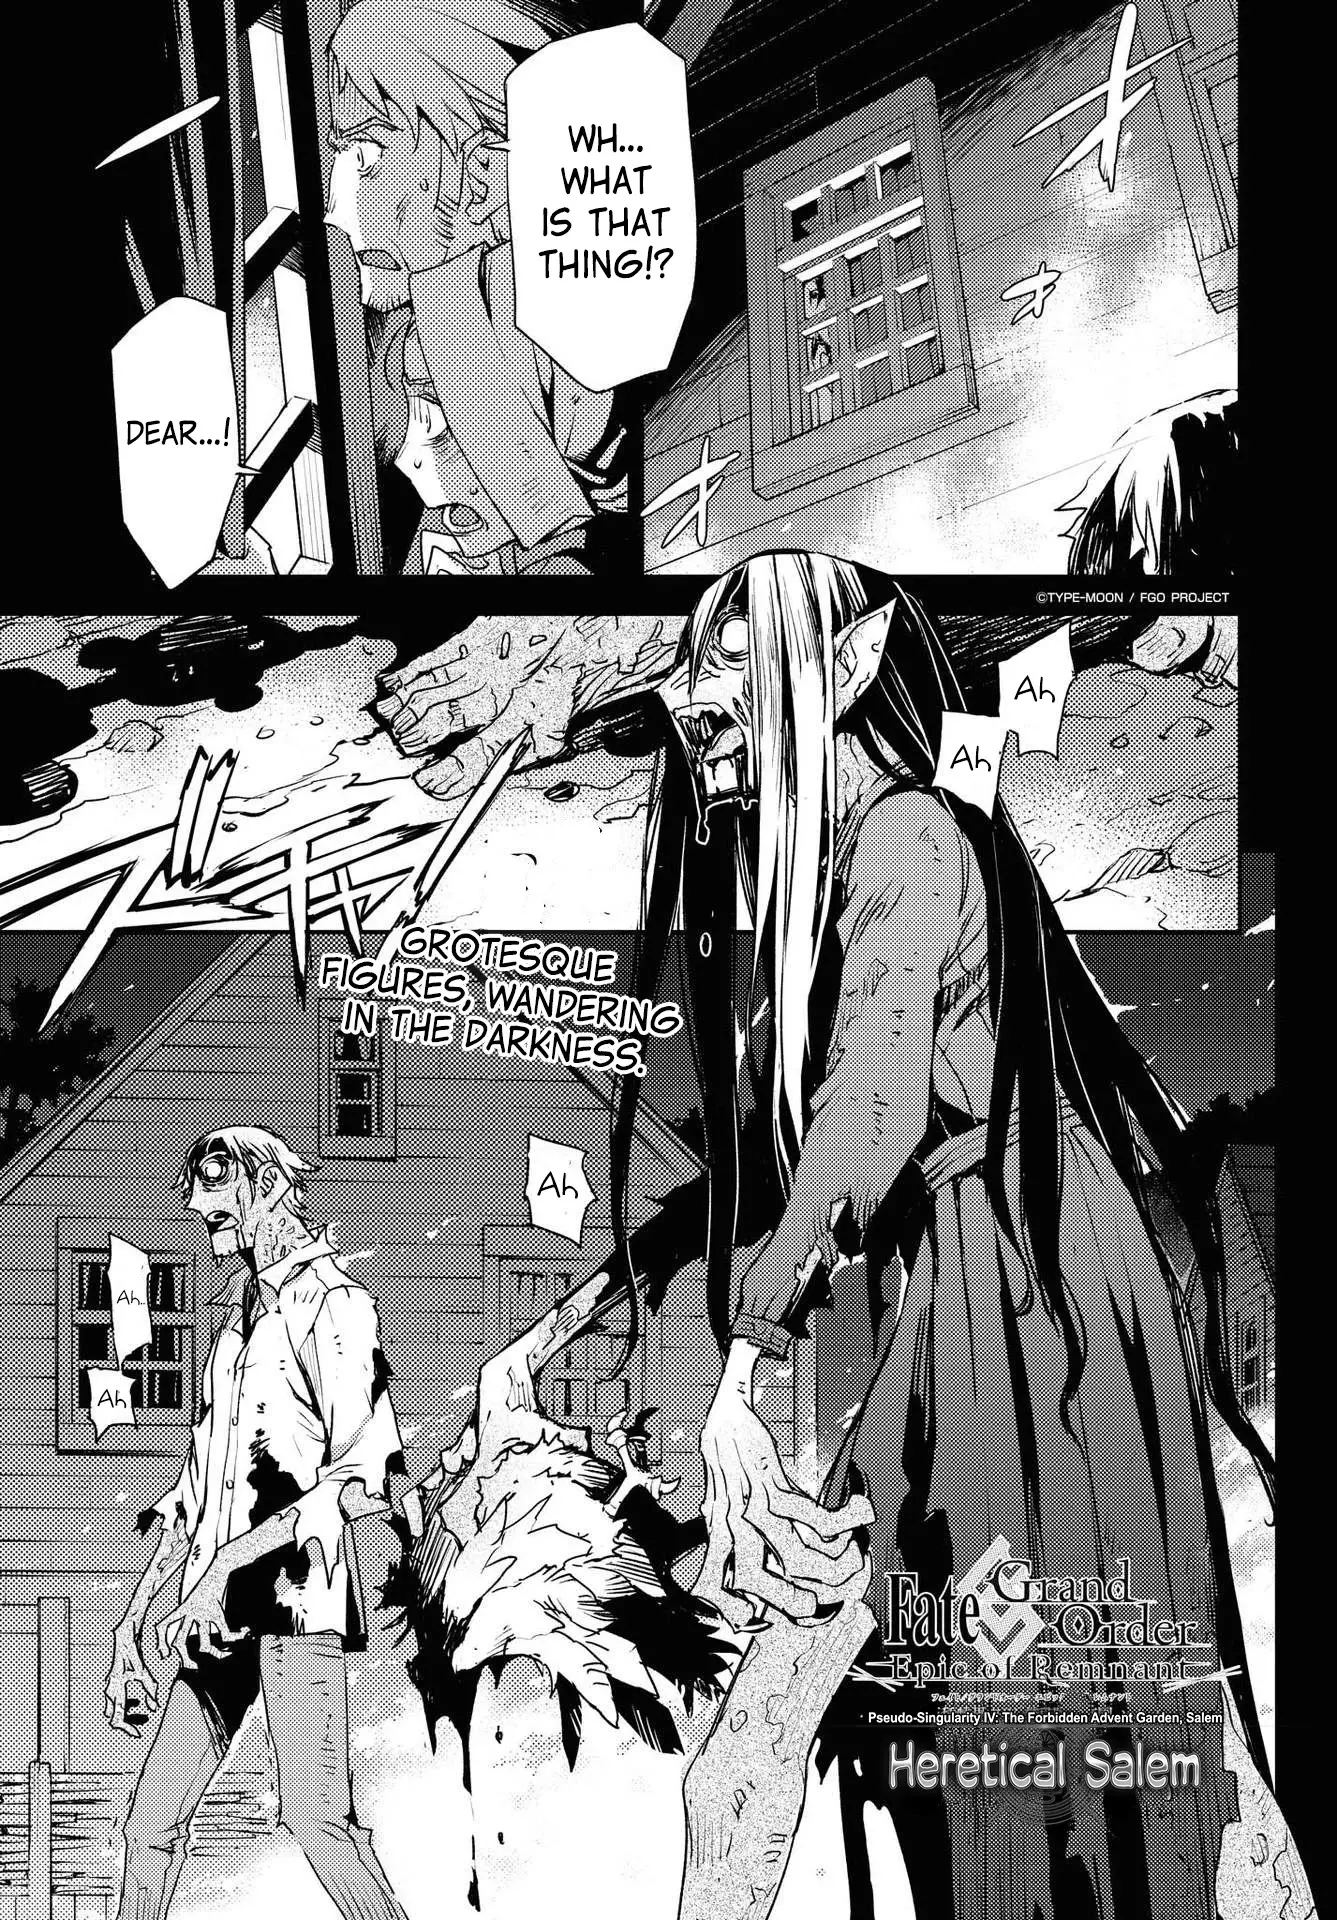 Fate/grand Order: Epic Of Remnant - Subspecies Singularity Iv: Taboo Advent Salem: Salem Of Heresy - 16 page 1